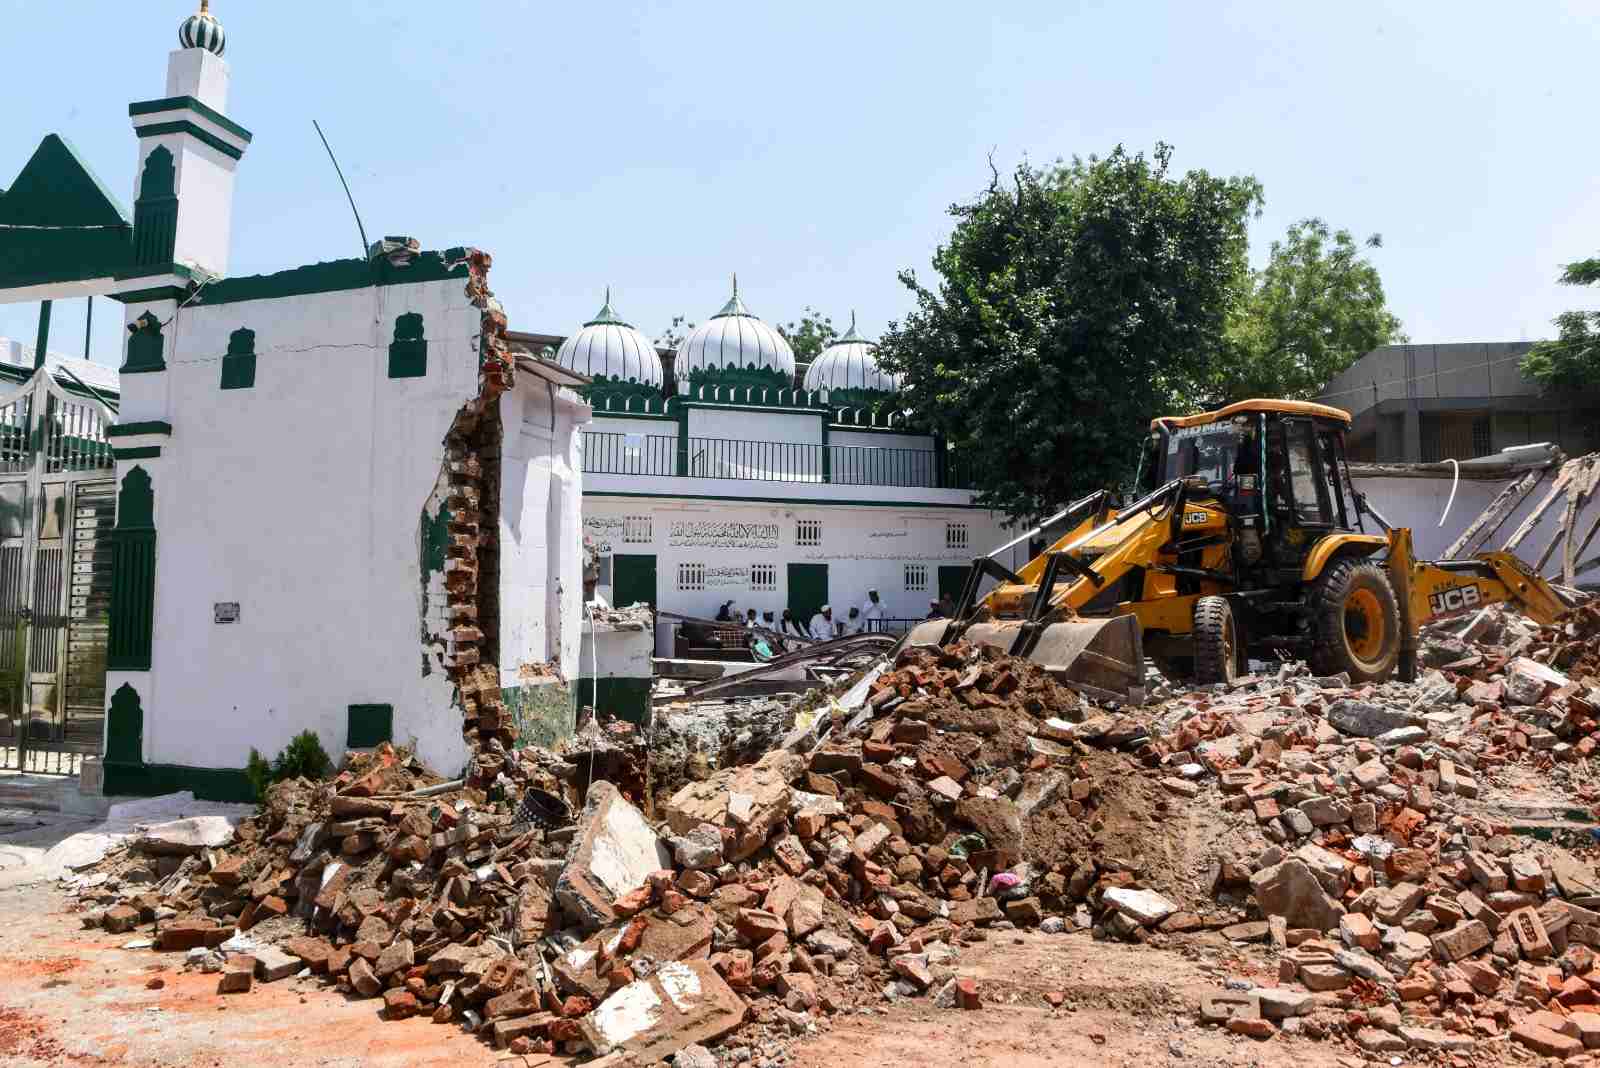 Delhi: Without Court order part of 250 YO mosque demolished by NDMC -  